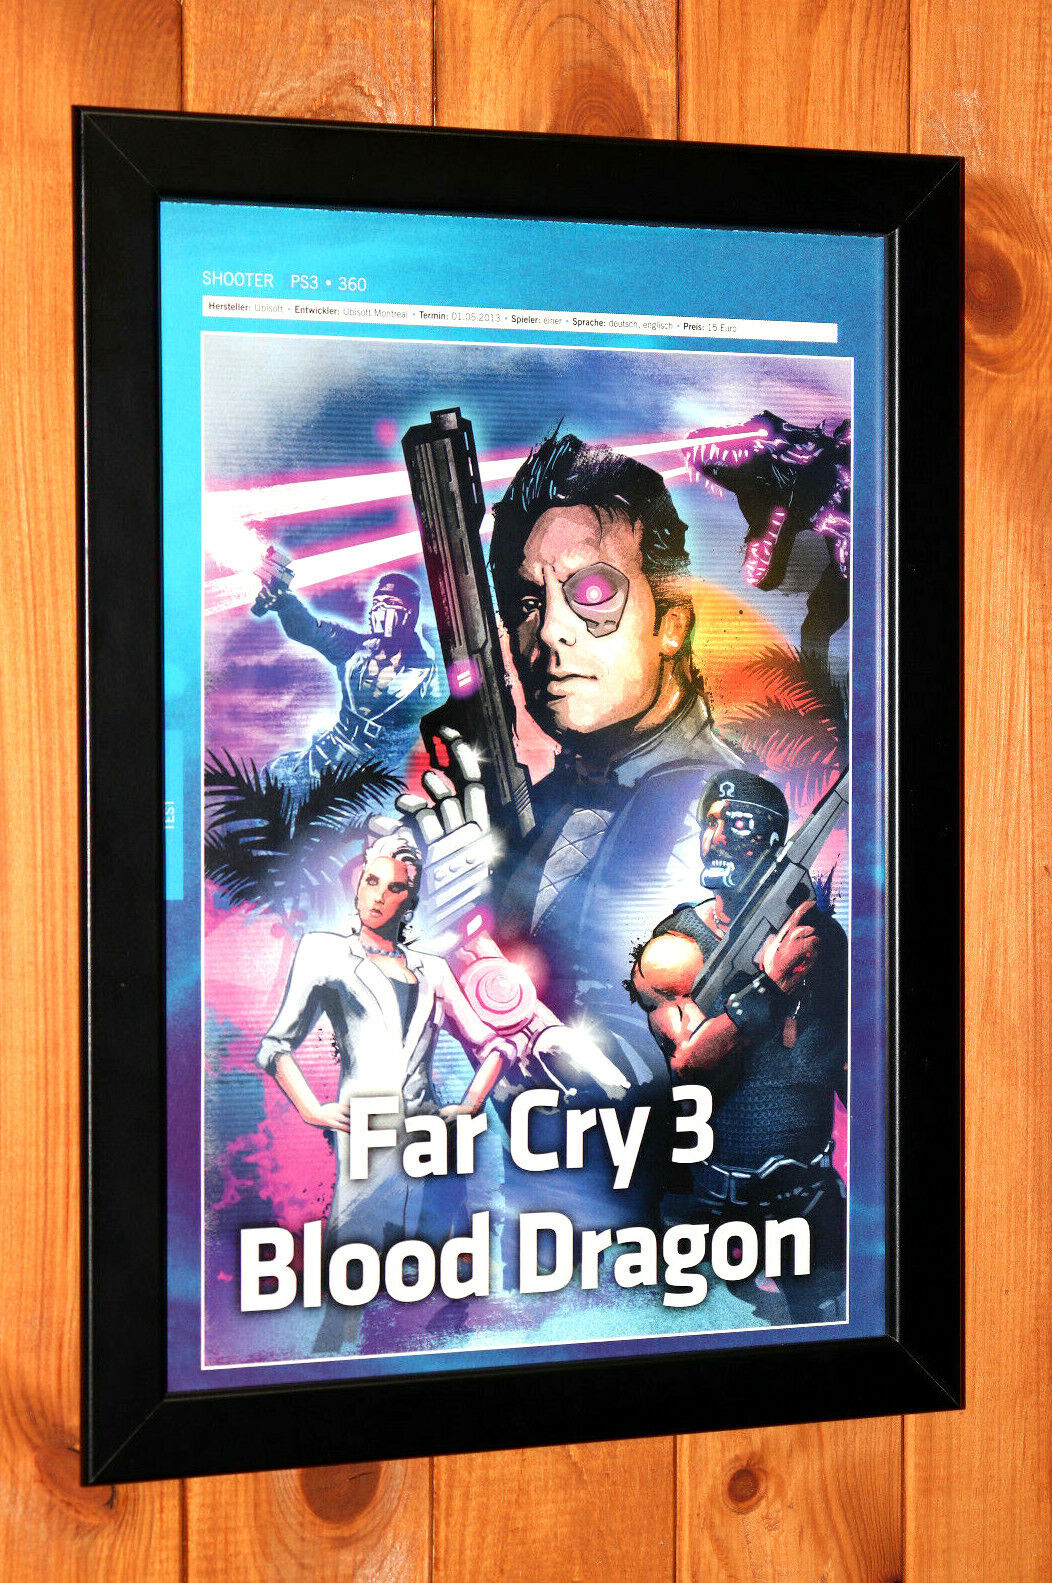 Pijlpunt plannen vermogen Far Cry 3 Blood Dragon PS3 Xbox 360 Ubisoft Small Promo Poster / Ad Page  Framed | eBay